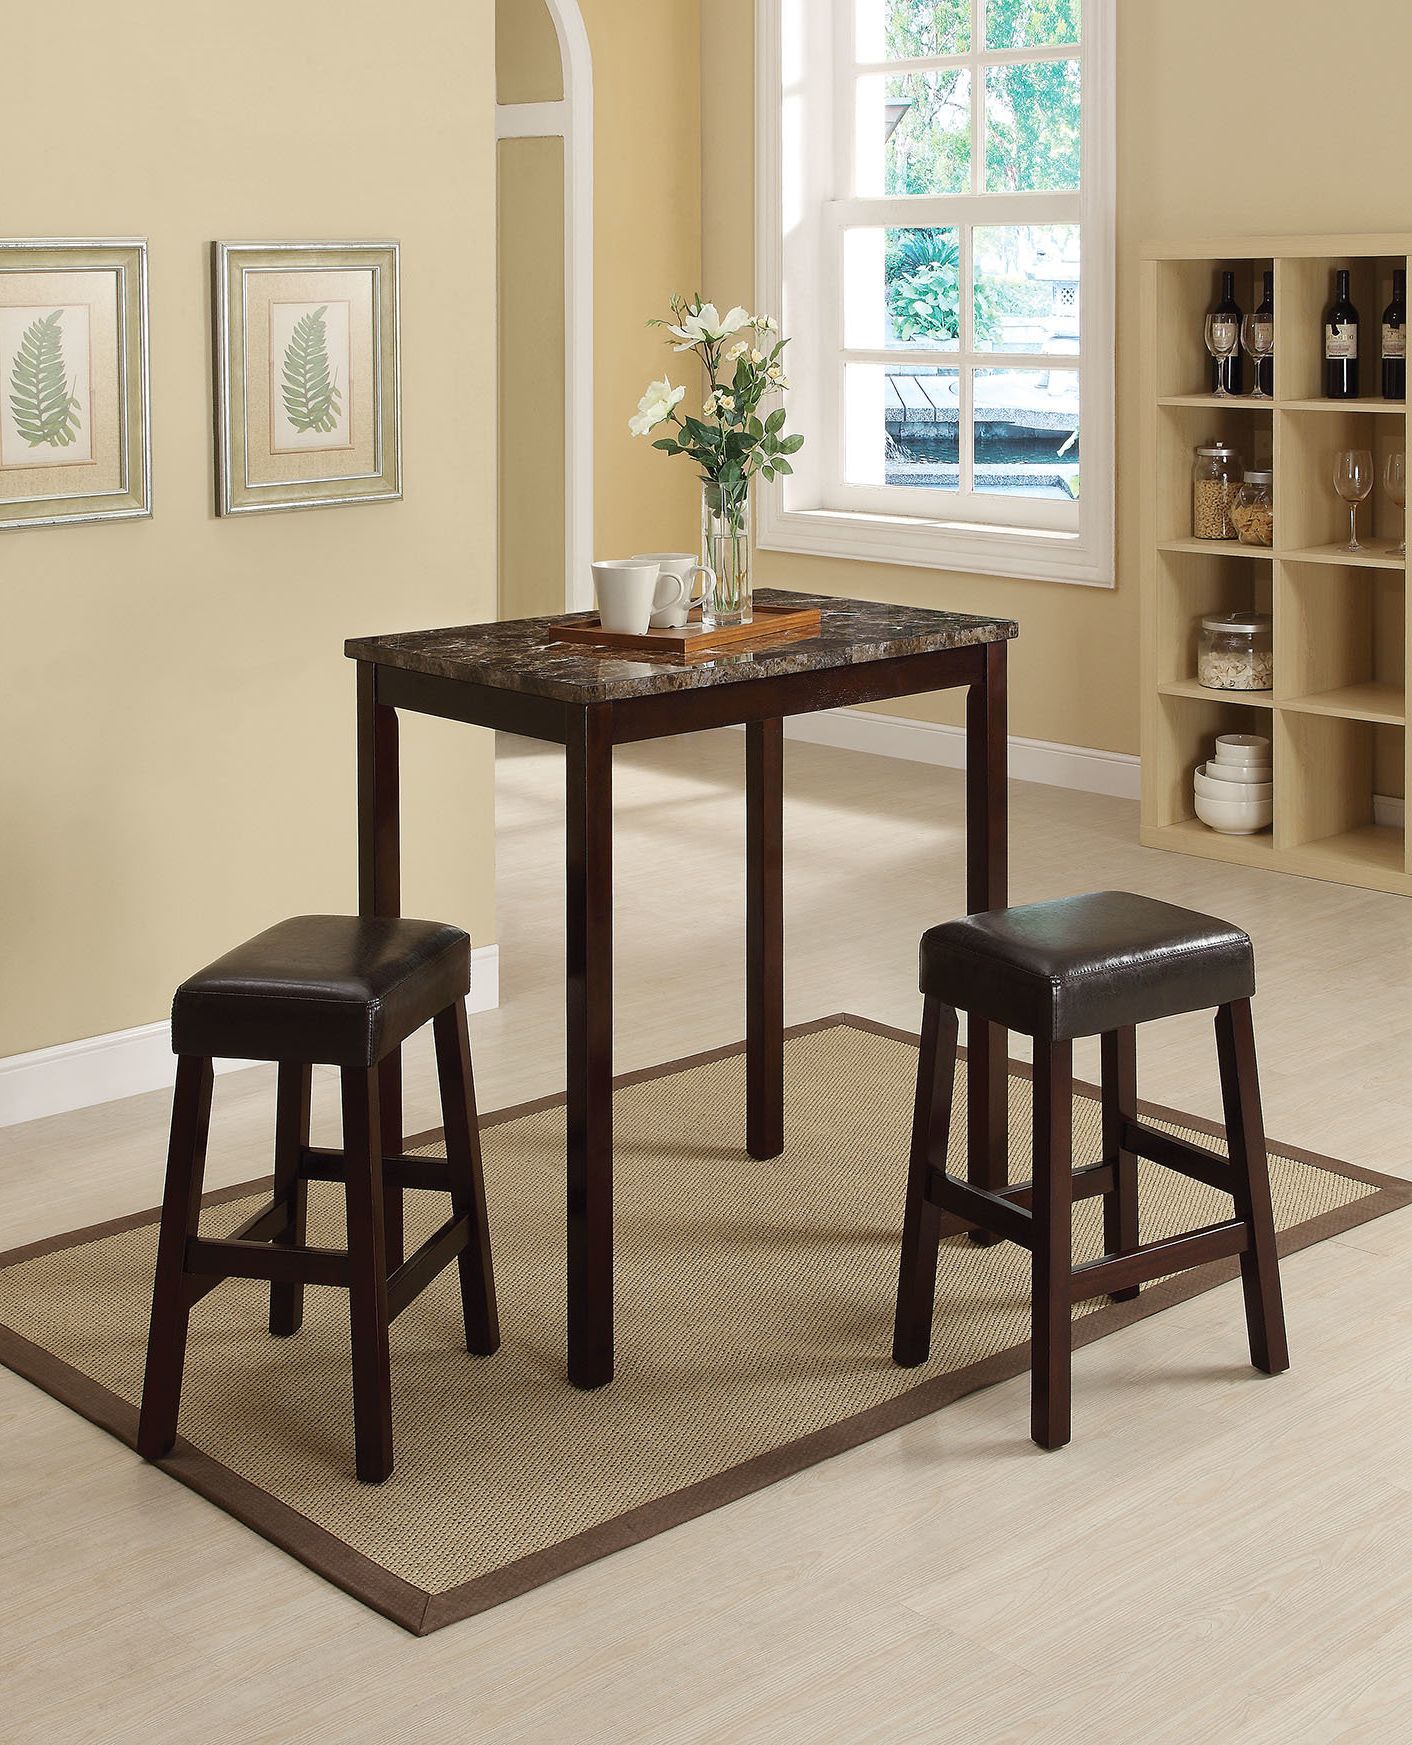 Askern 3 Piece Counter Height Dining Set With Regard To Current Askern 3 Piece Counter Height Dining Sets (set Of 3) (View 1 of 20)